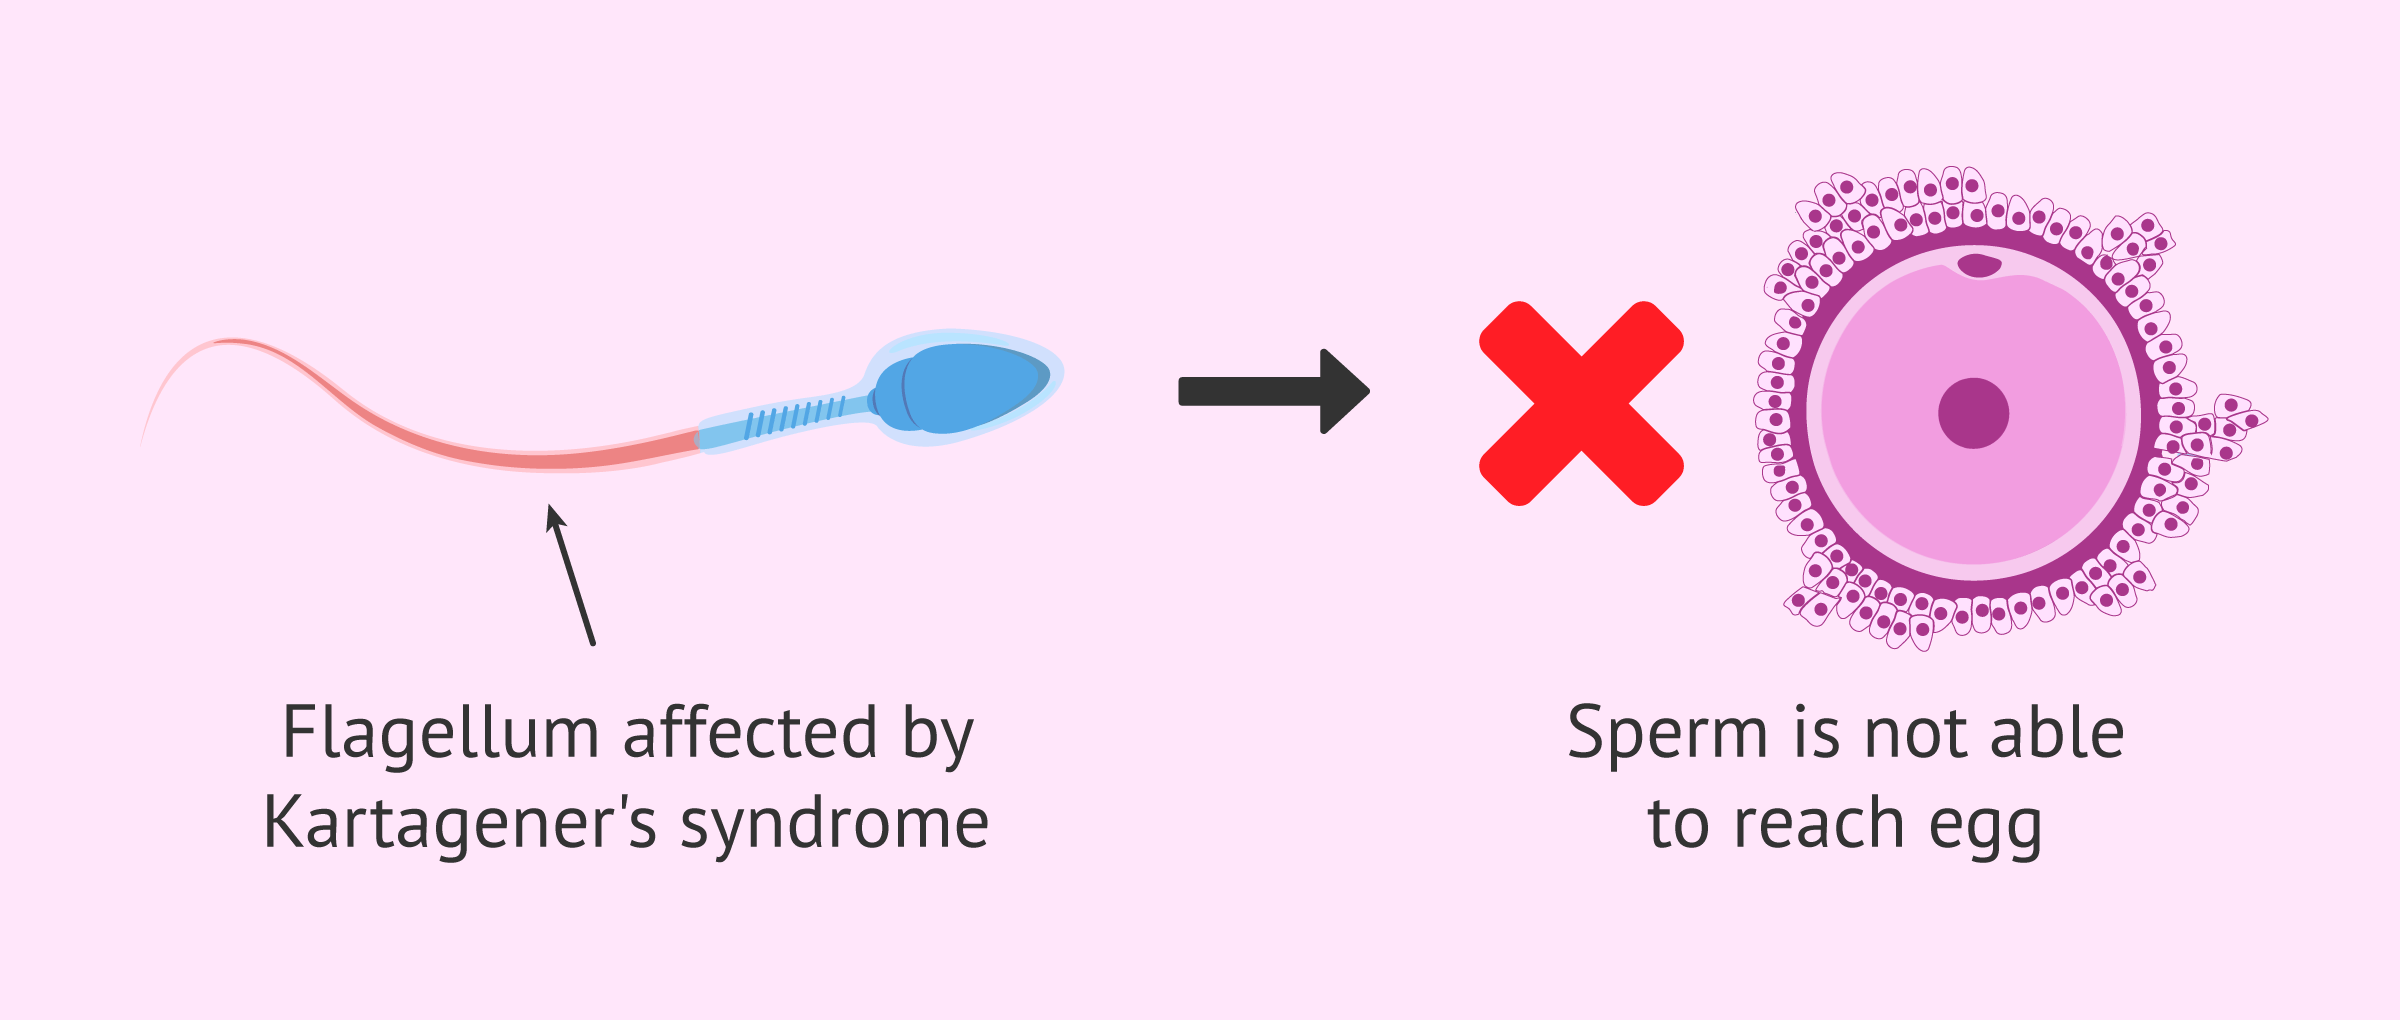 Male Infertility due to Kartagener's Syndrome